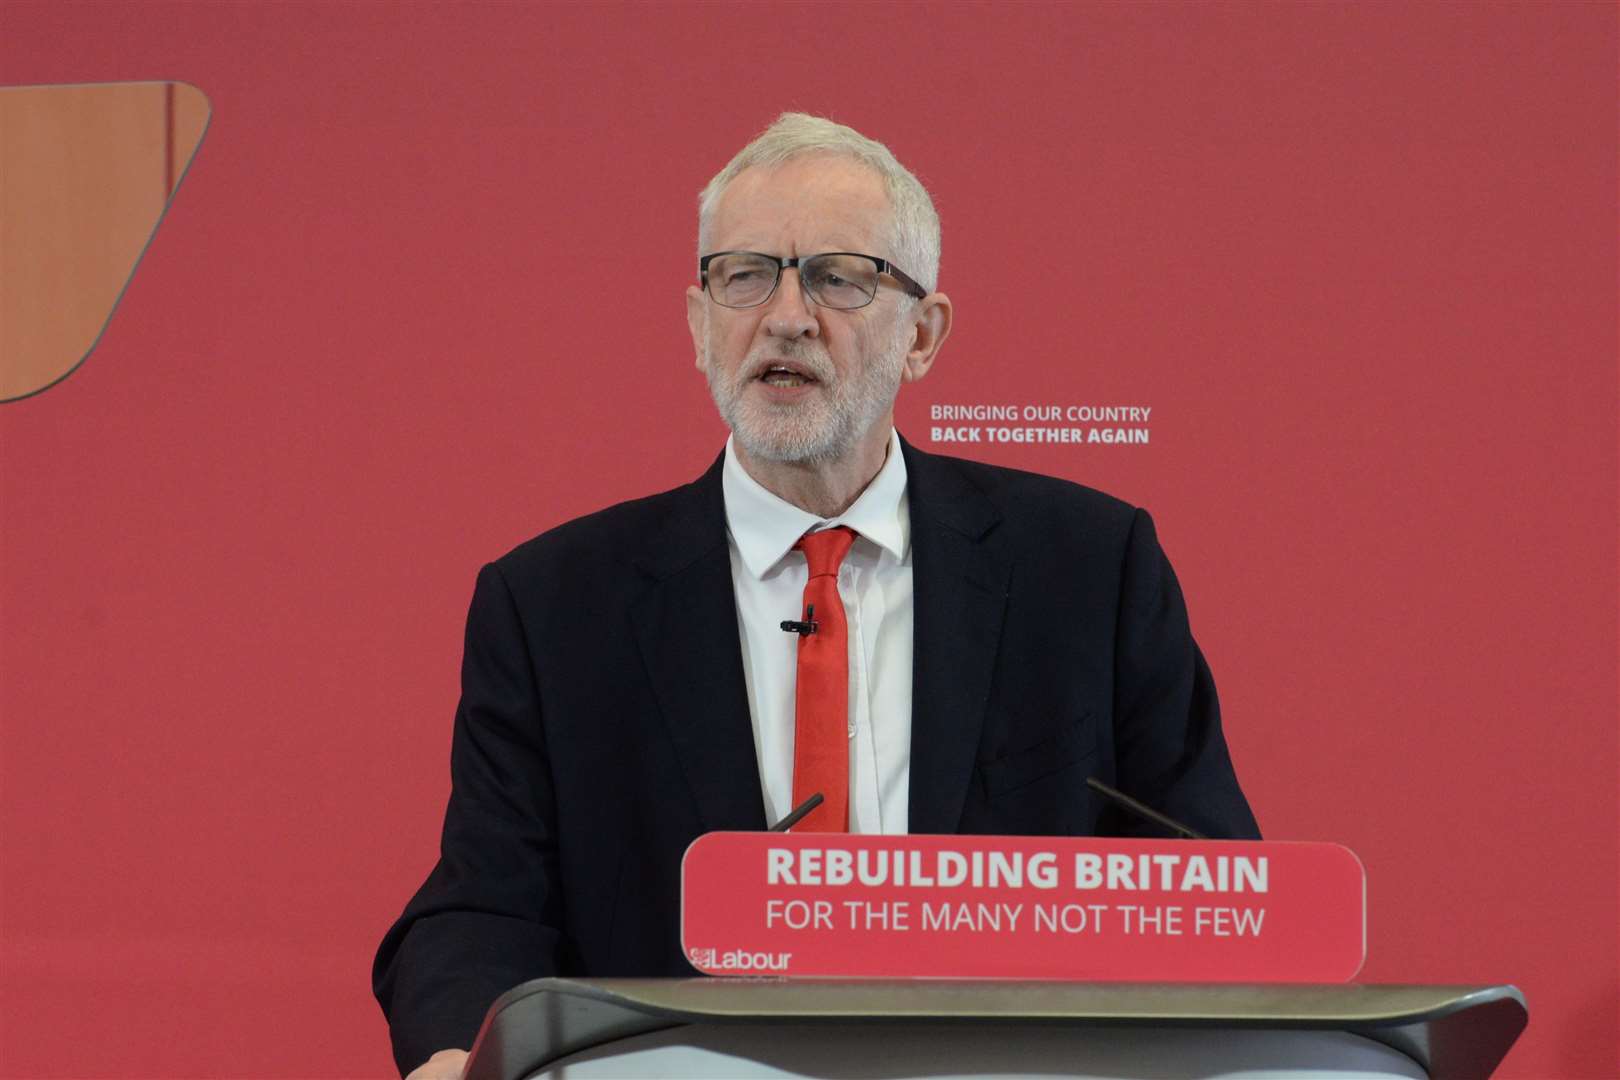 Jeremy Corbyn will not lead Labour into another election